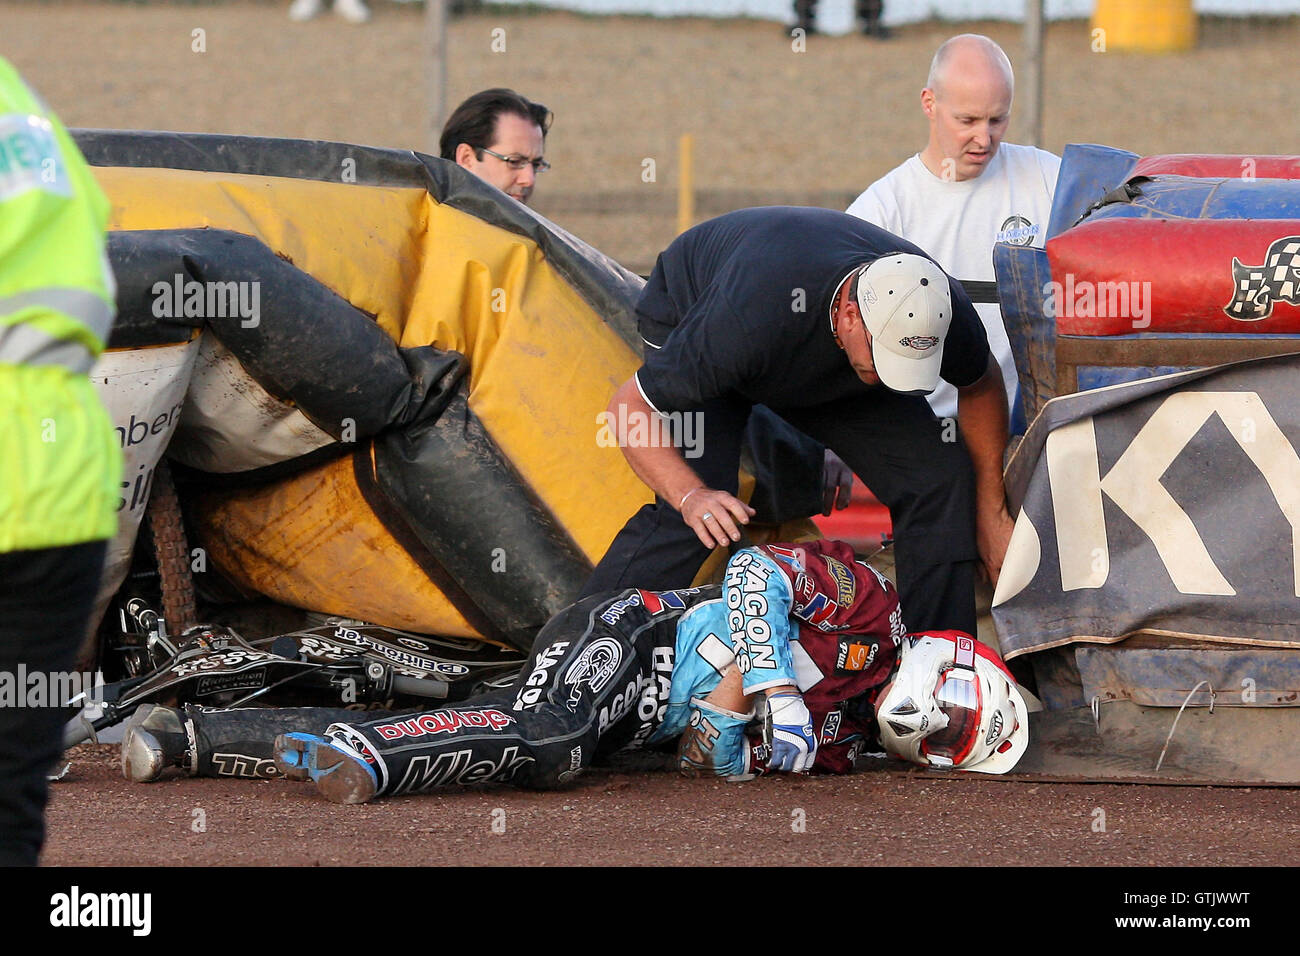 Heat 1: Lee Richardson (red) crashes out - Lakeside Hammers vs Coventry  Bees - Sky Sports Elite League Speedway at Arena Essex Raceway, Purfleet -  22//08/09 Stock Photo - Alamy